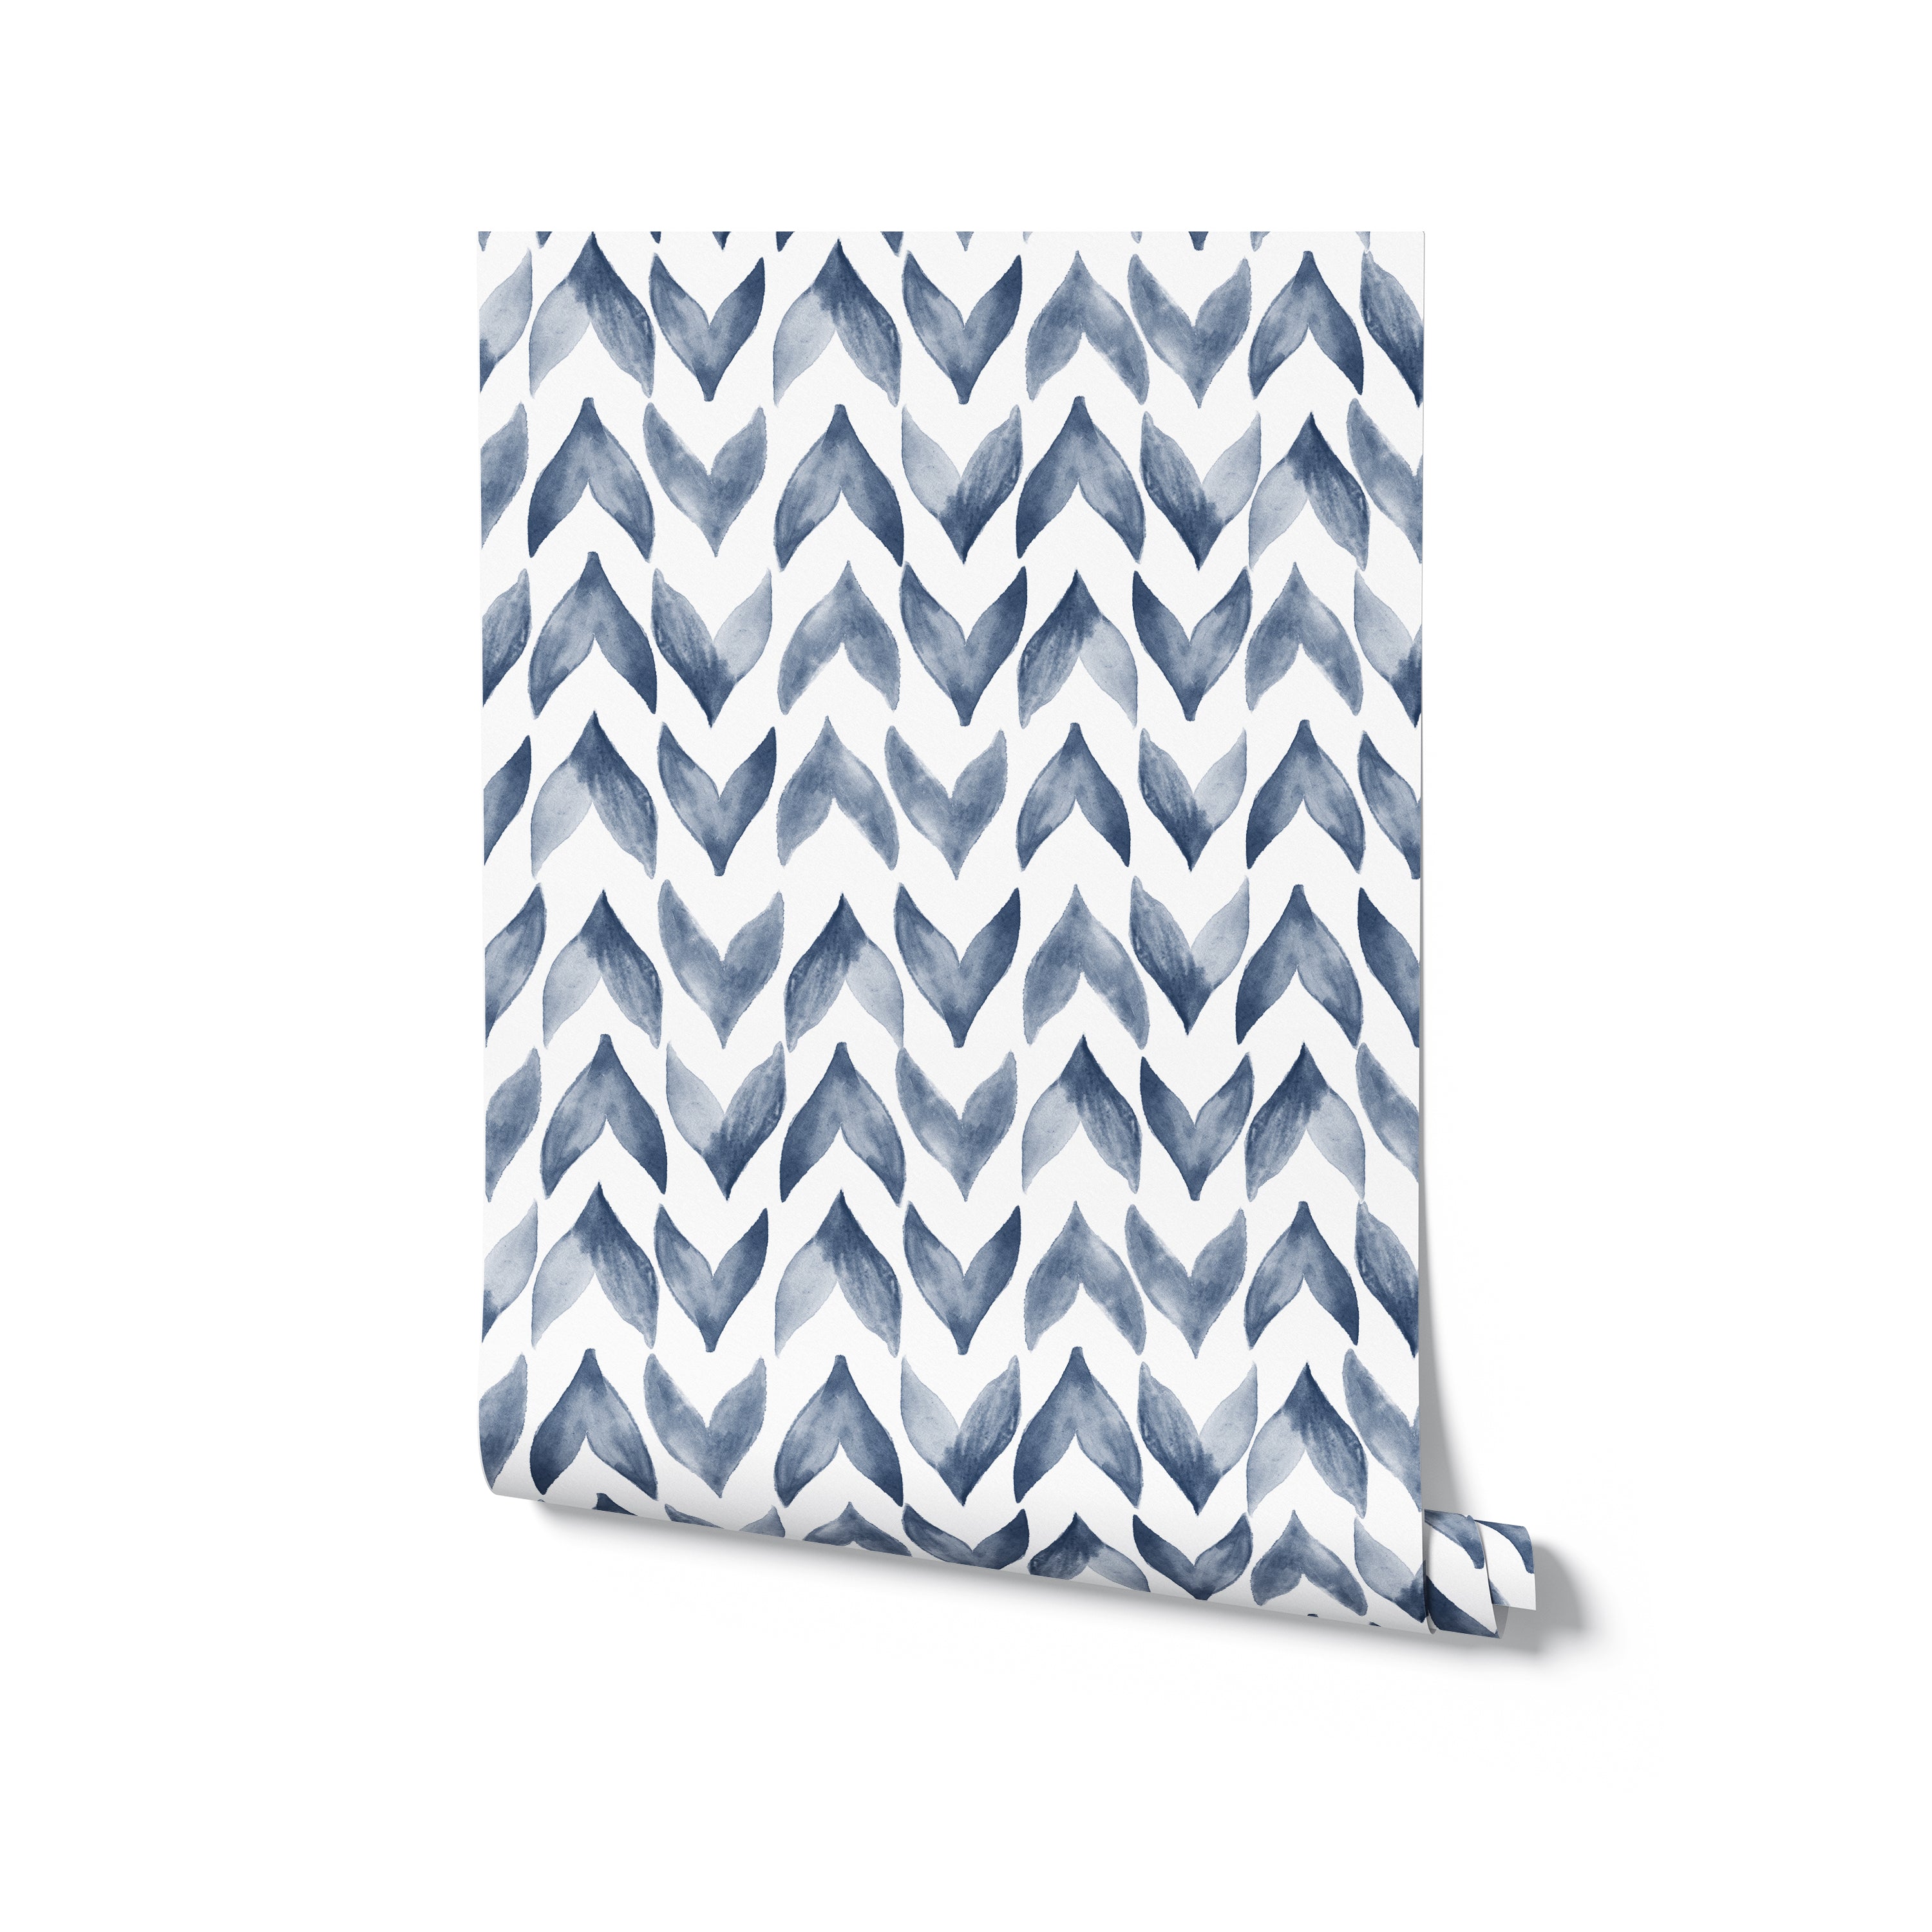 A rolled-up wallpaper sample revealing the Moroccan Tile pattern, which consists of white and navy watercolor zigzag shapes, giving a sophisticated and contemporary feel to the design.